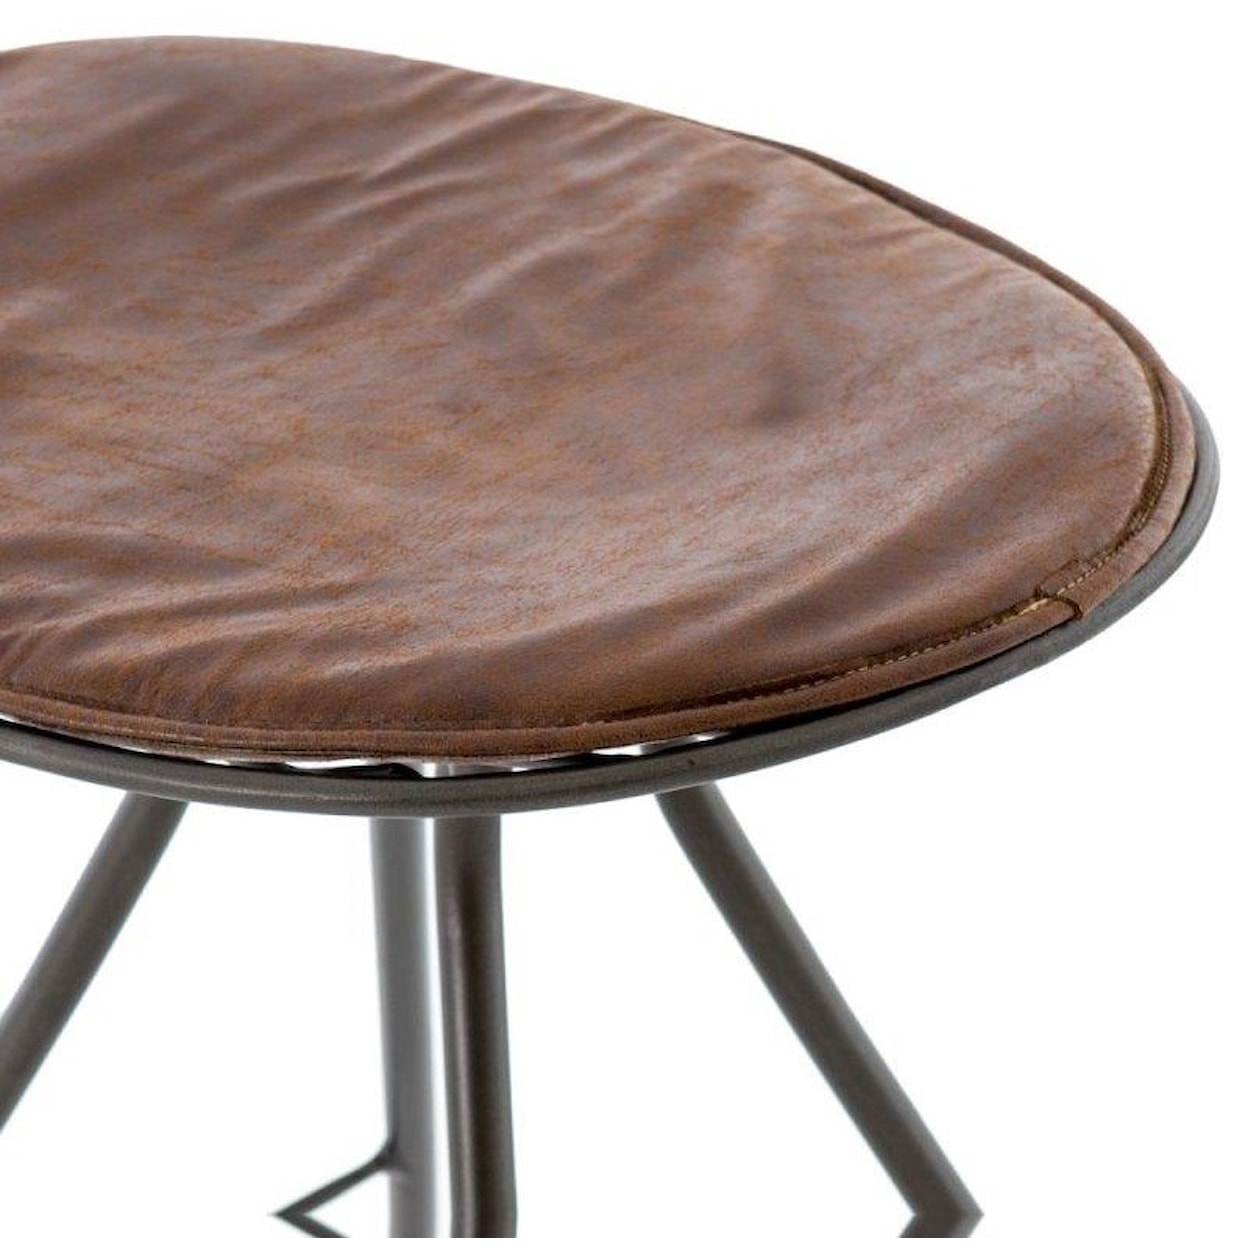 Four Hands Rockwell Ryker Counter Stool